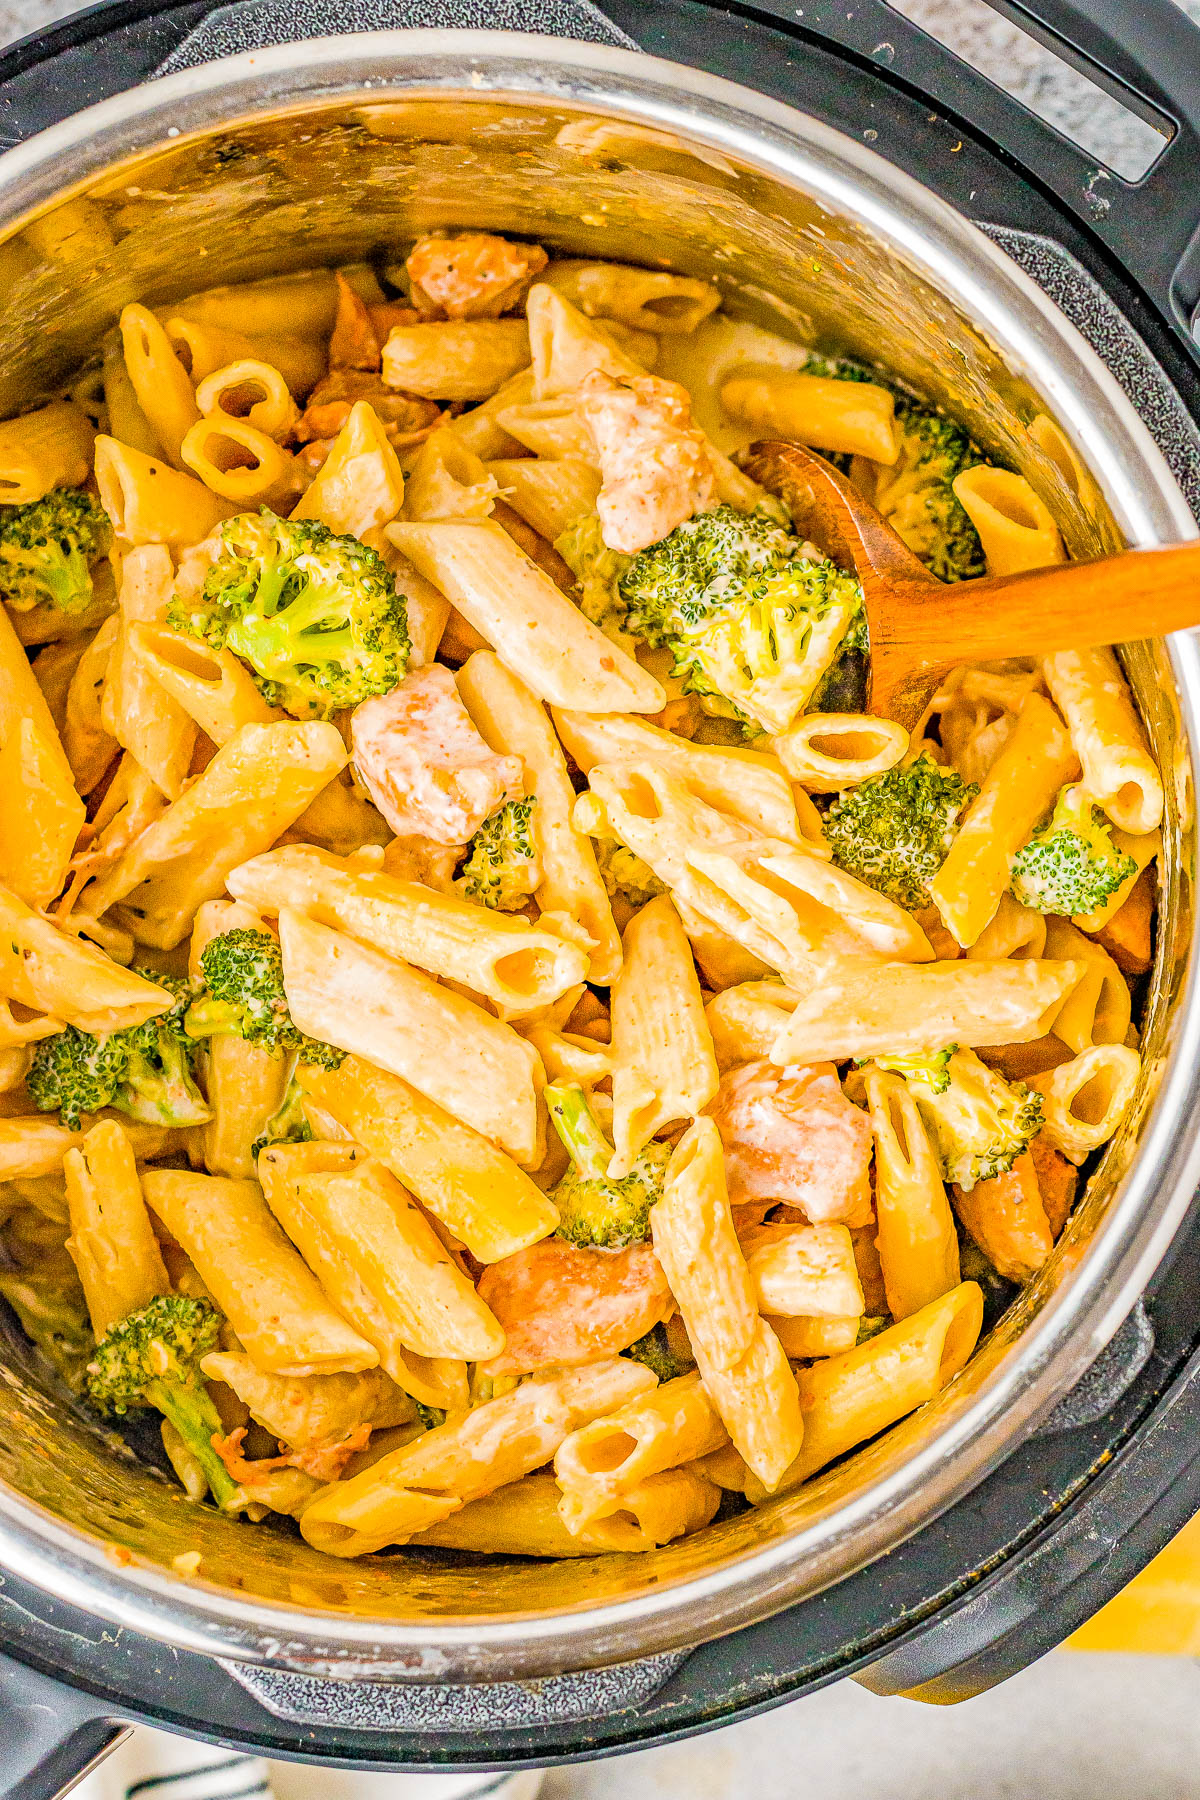 Instant Pot Chicken Broccoli Pasta – Juicy seasoned chicken with pasta and broccoli, all tossed in an AMAZING creamy cheese sauce! A family favorite EASY dinner recipe that’s perfect for busy weeknights! Made in the Instant Pot in 30 minutes and stovetop cooking directions are also provided.